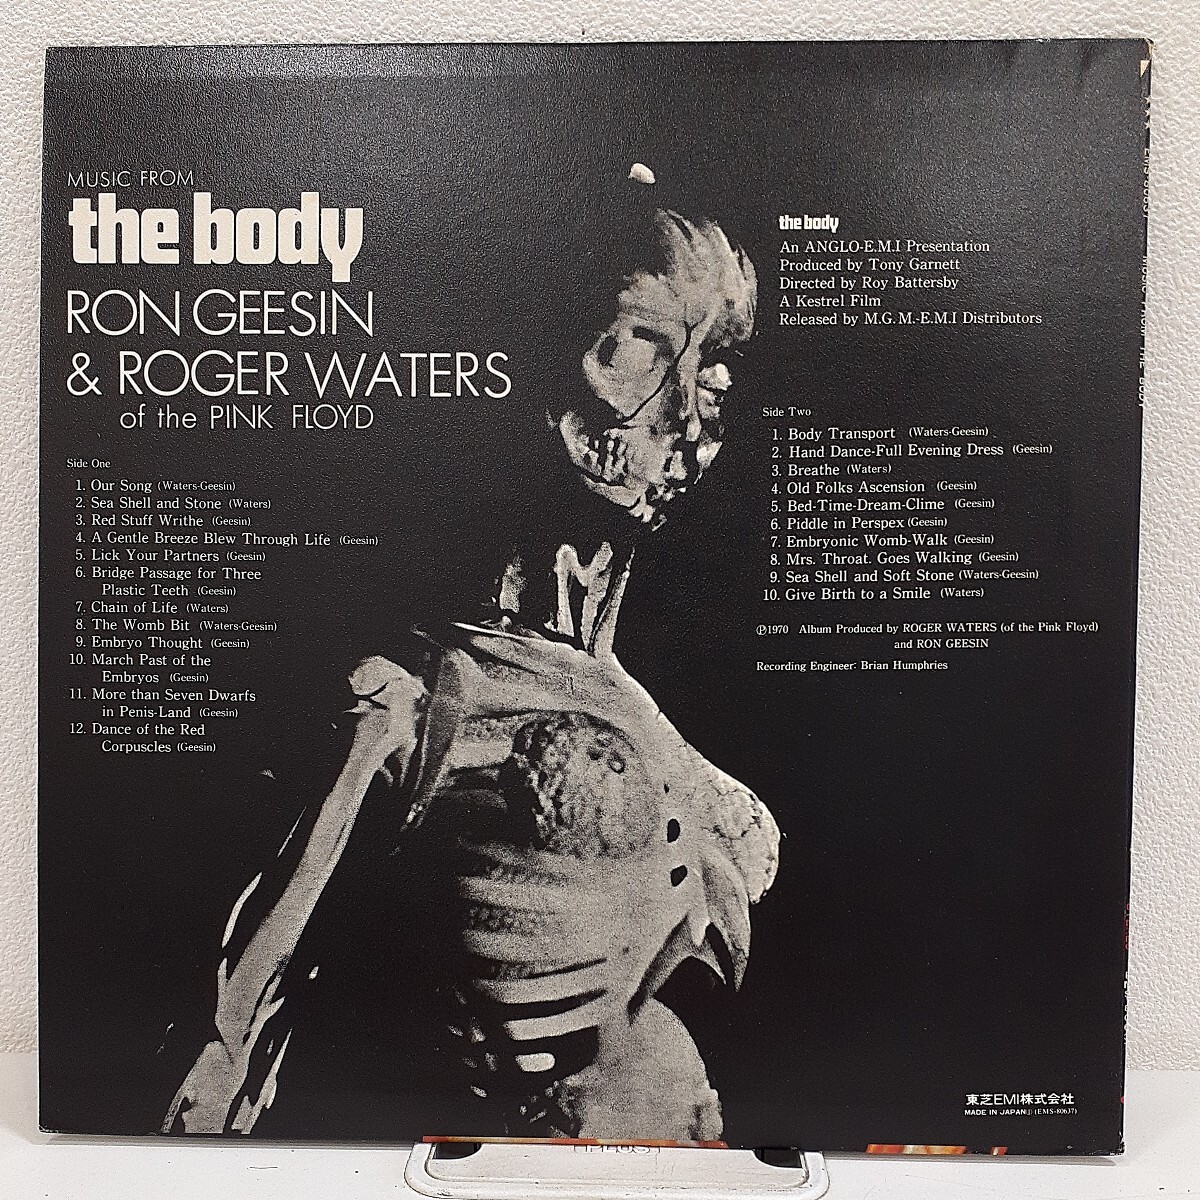 LP Ron Geesin & Roger Waters - music from THE BODY / ロン・ギーシン ロジャー・ウォーターズ - 肉体 / 国内盤 EMS-80637 レコード_画像2